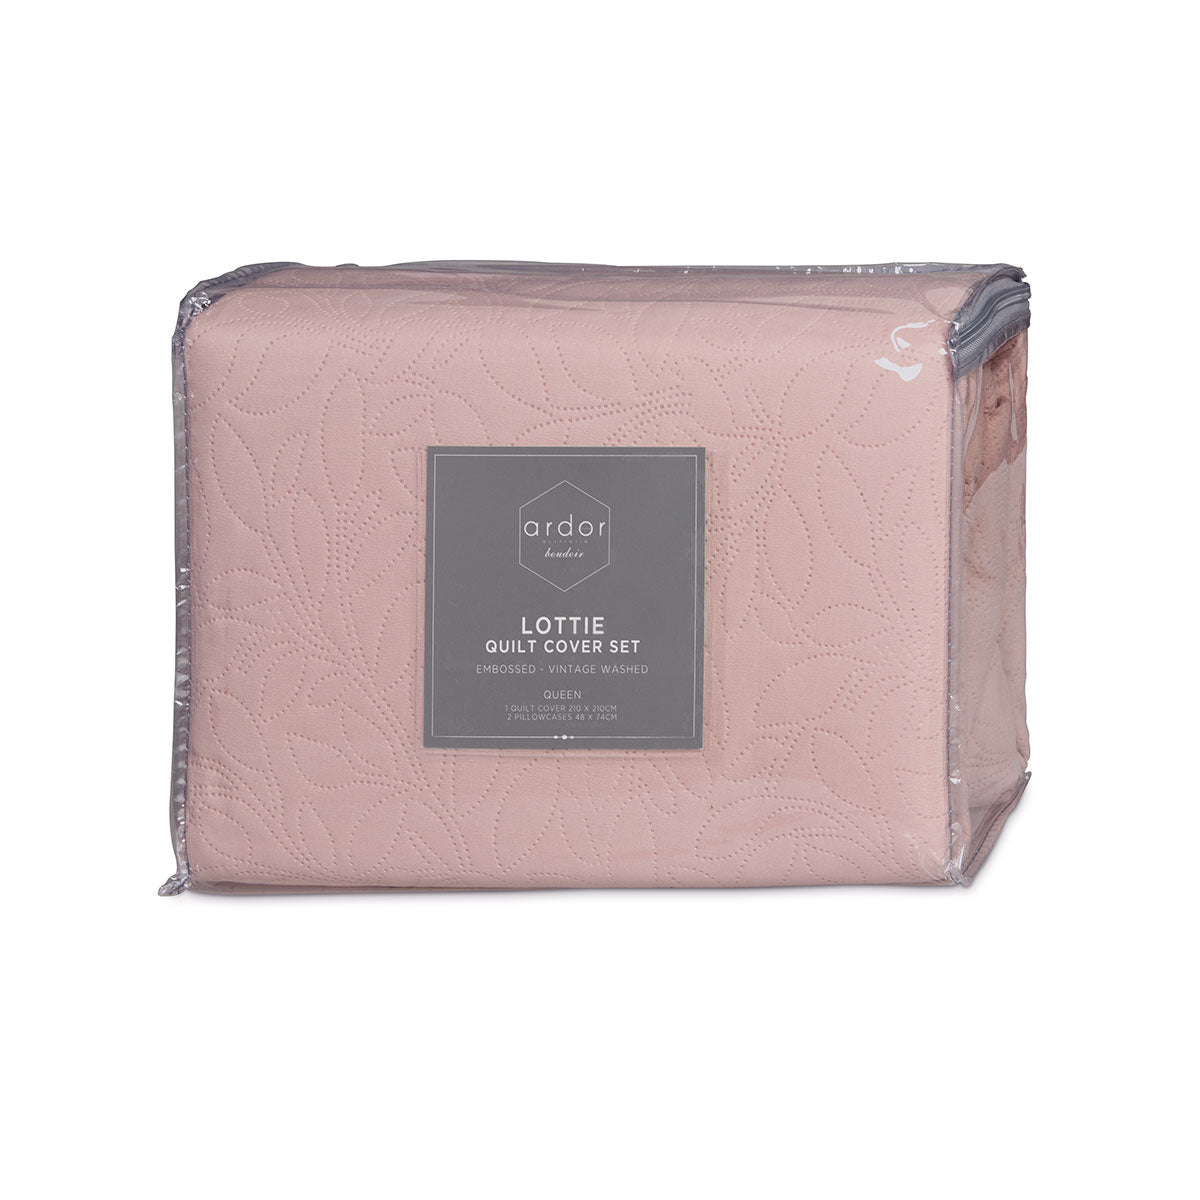 QUEEN Pinsonic Embossed Quilt Cover Set - Blush